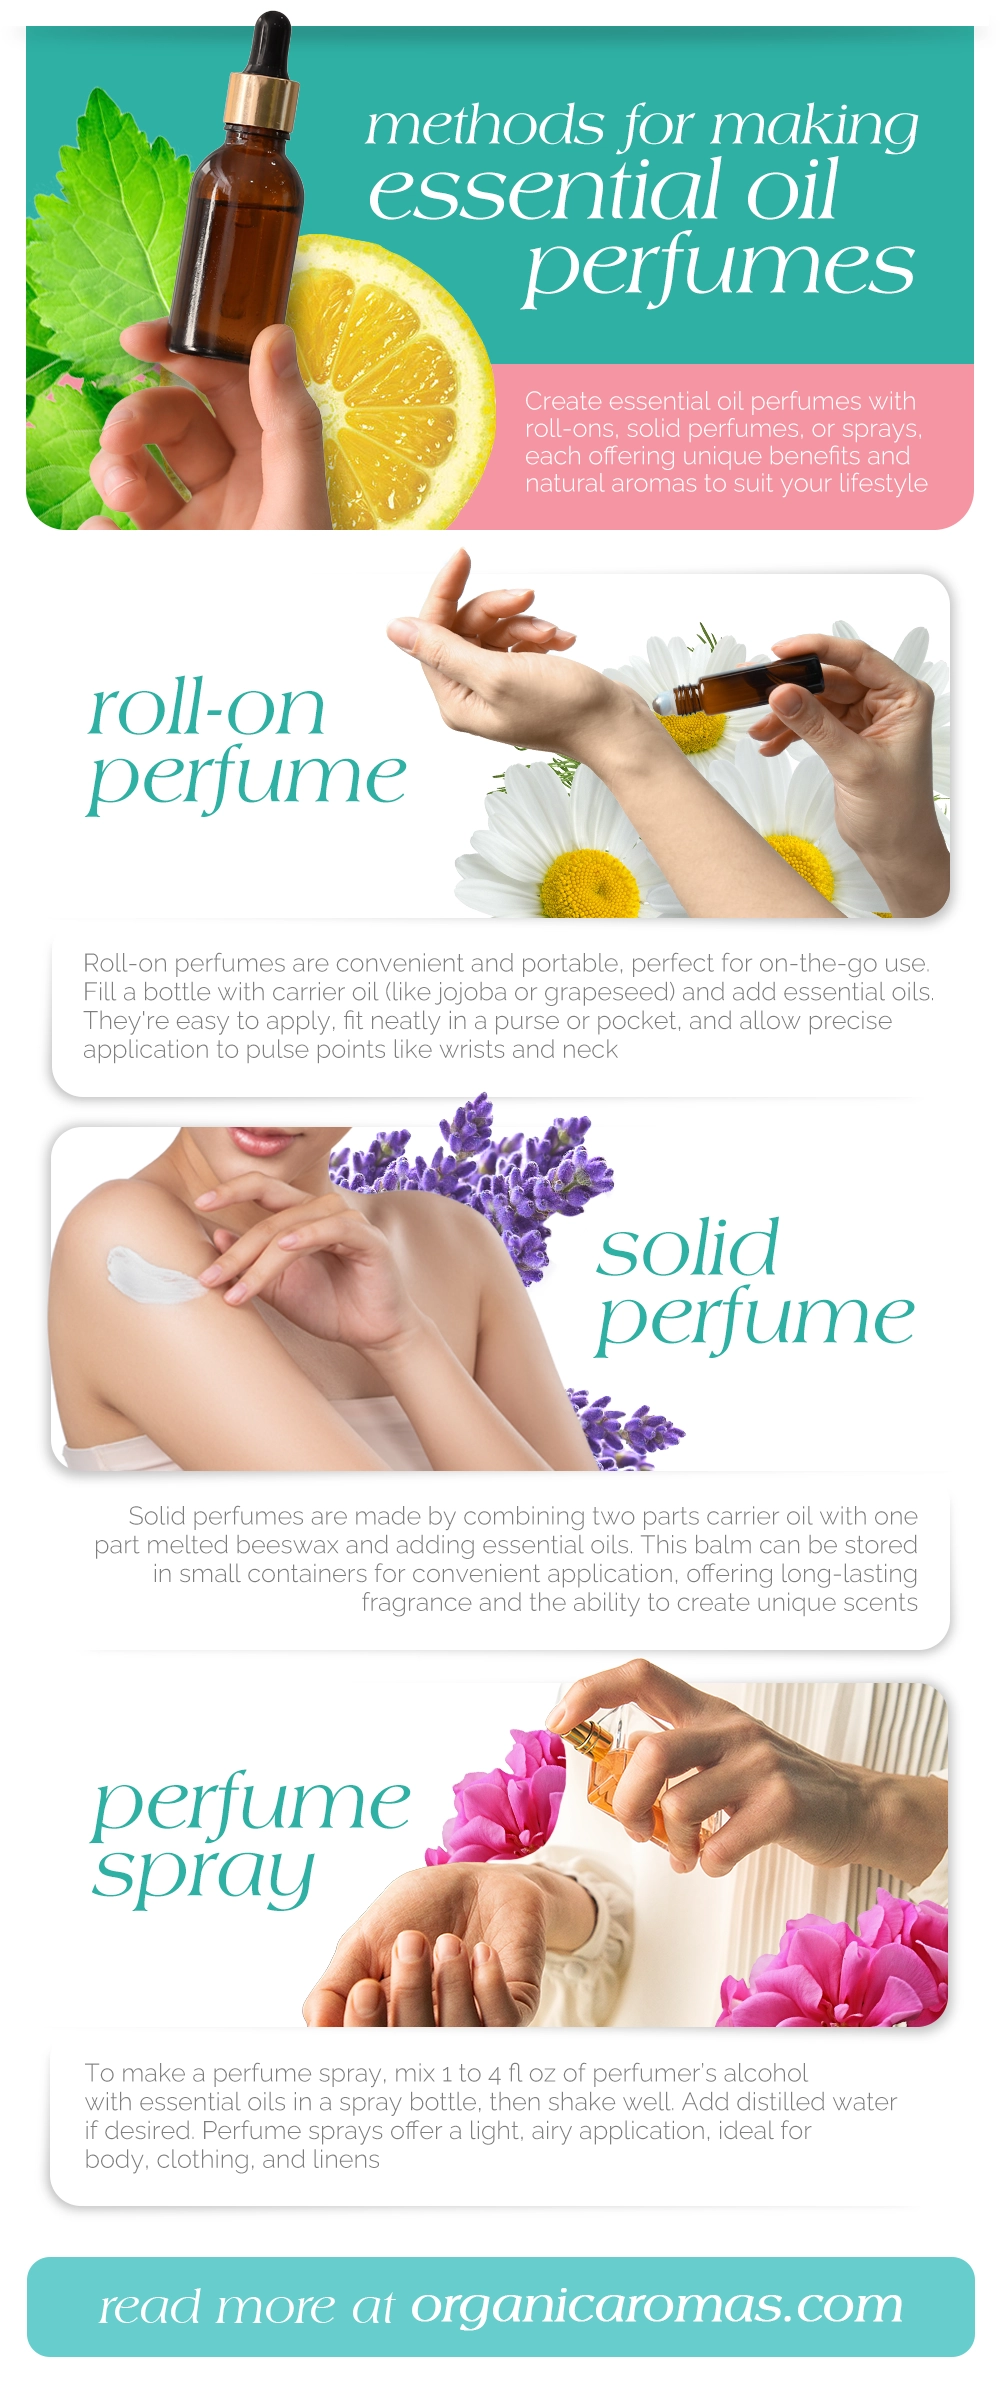 Methods for Making Essential Oil Perfumes Infographic by Organic Aromas